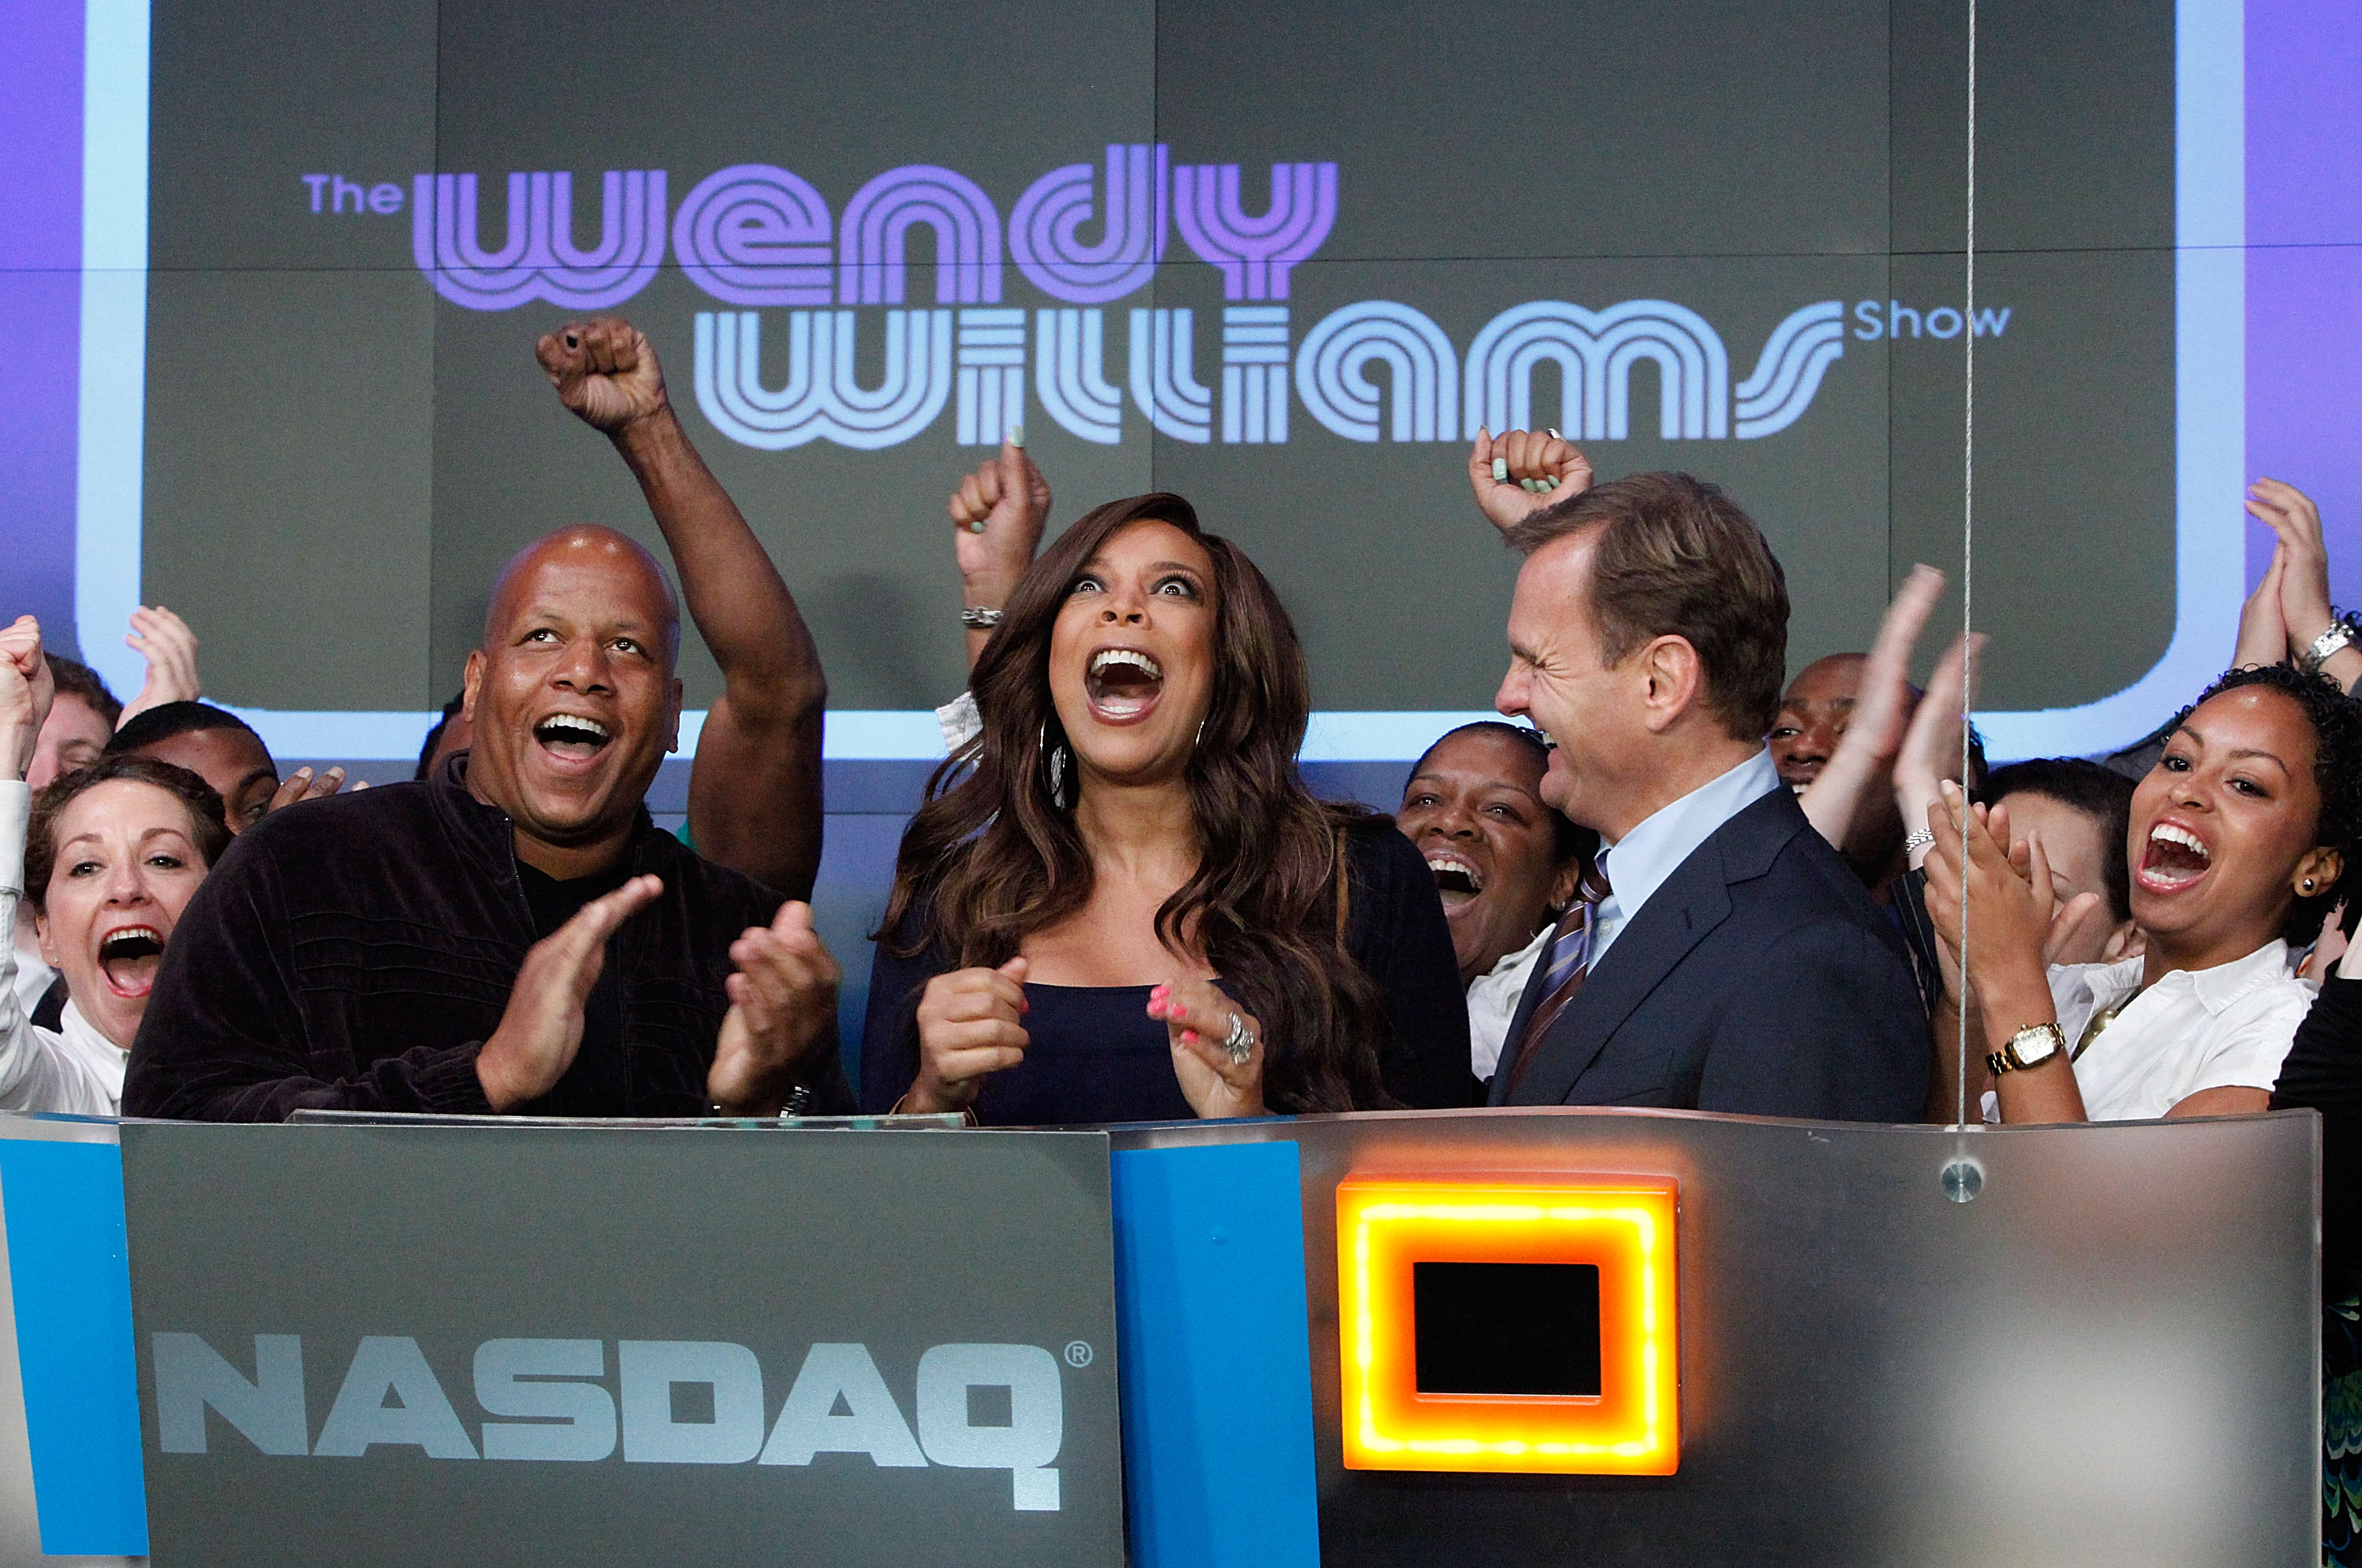 Kevin Hunter, Wendy Williams and Bruce Oust rings the opening bell at the NASDAQ MarketSite on August 25, 2010 in New York City | Source: Getty Images